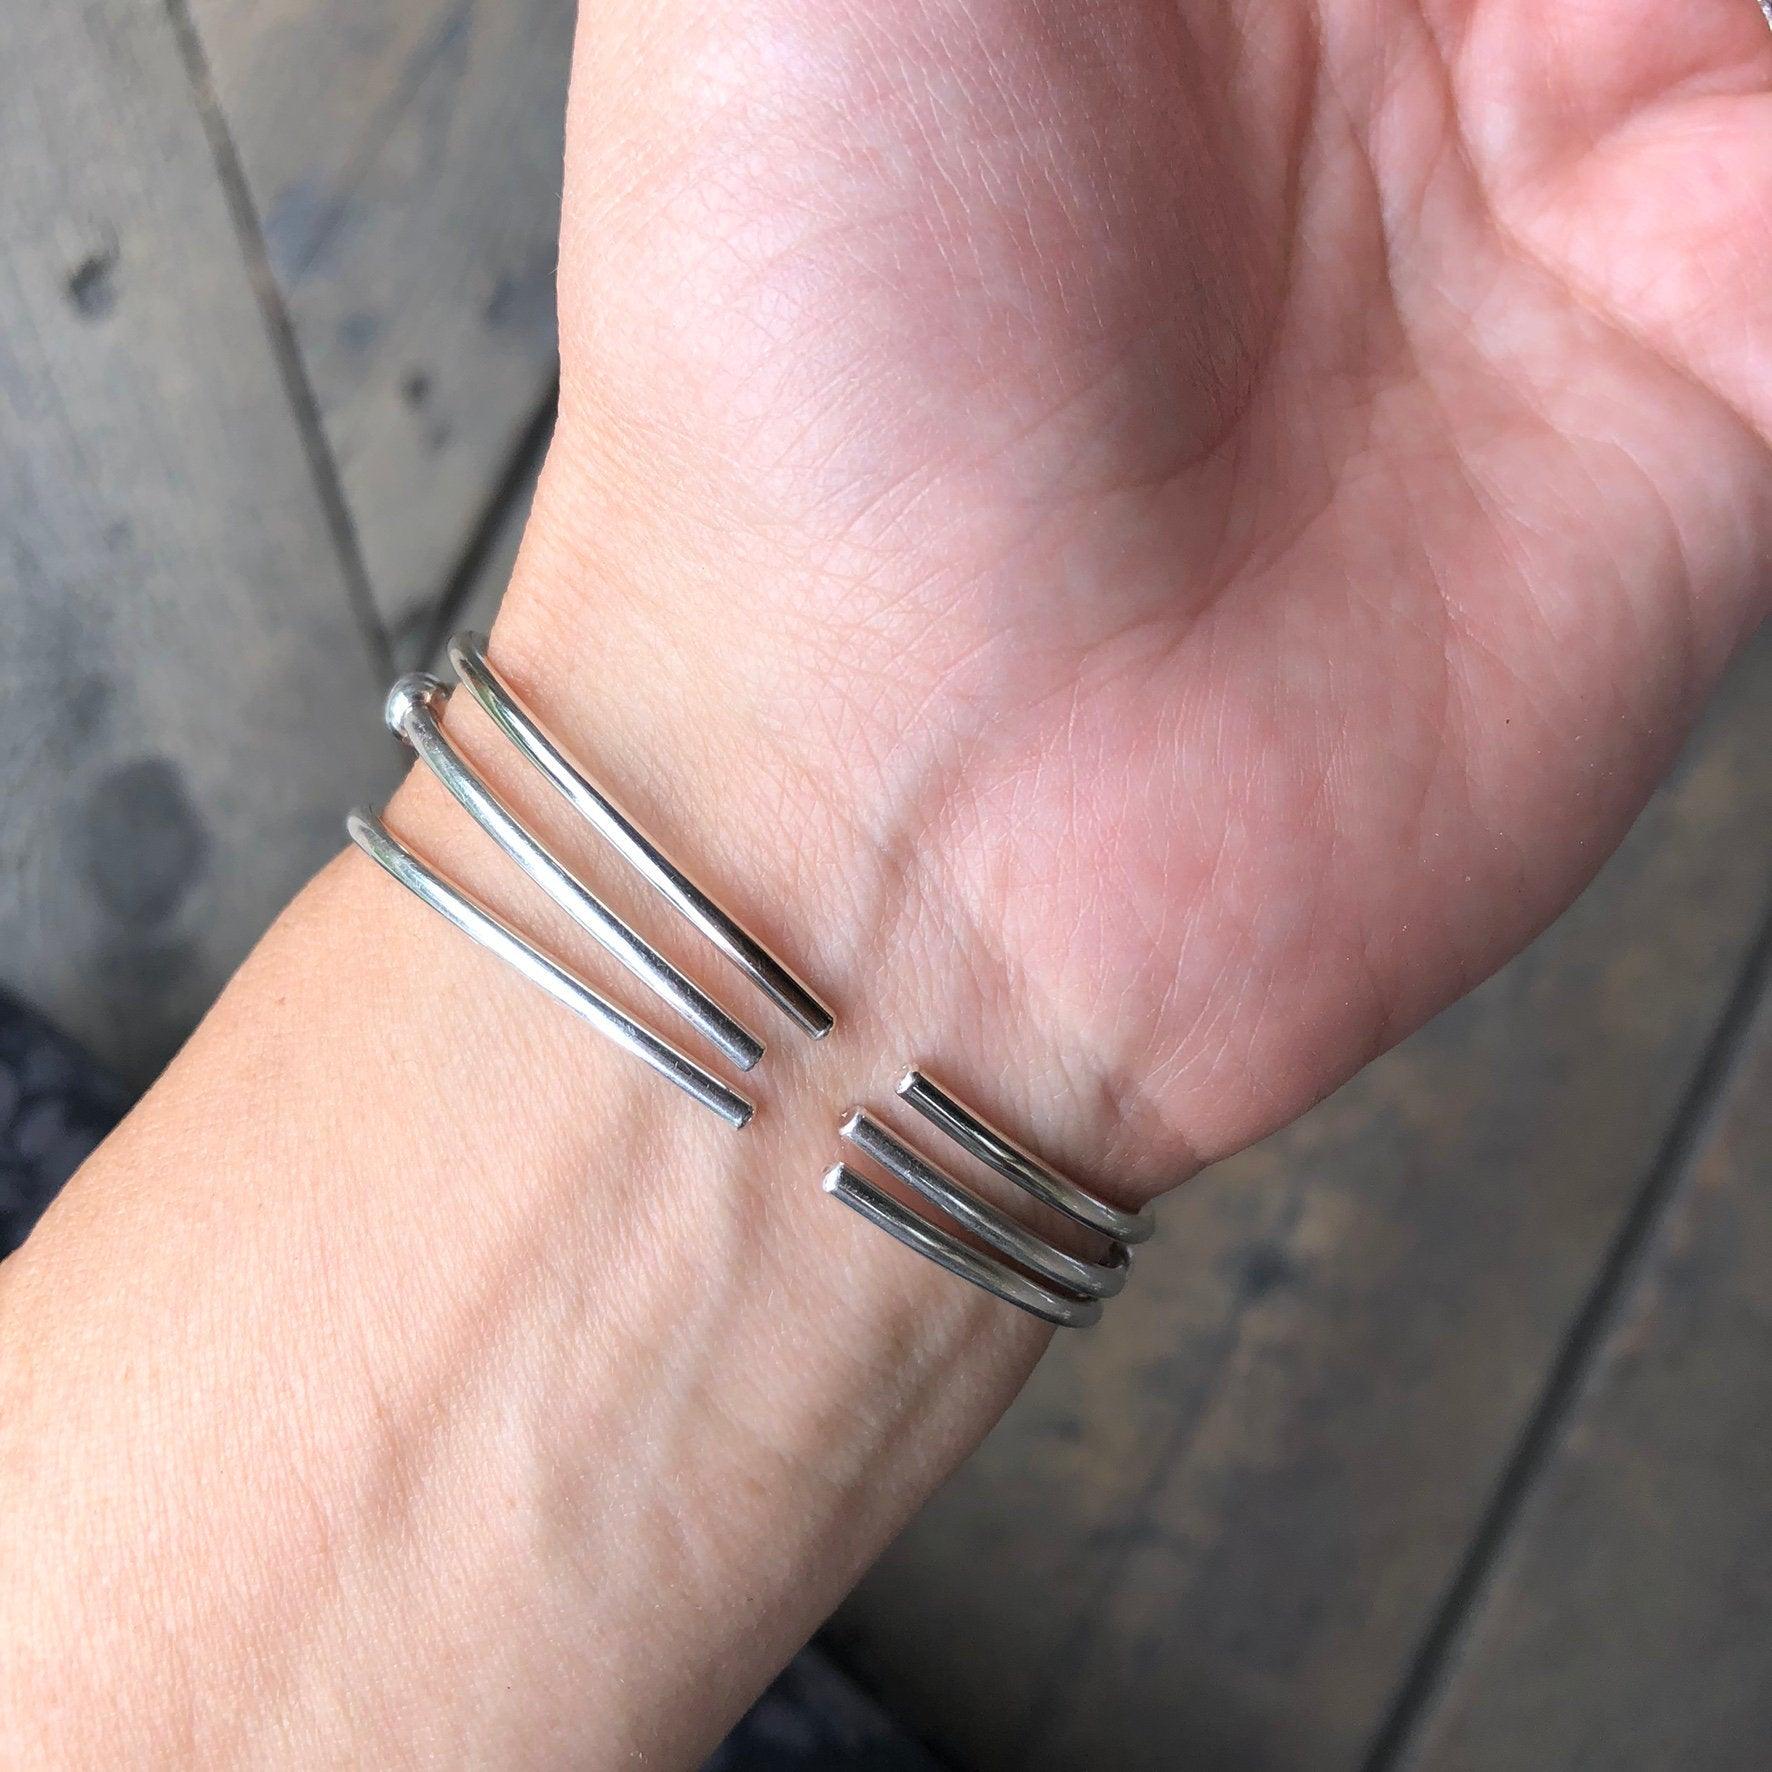 The back of the Morse Code Bracelet while wearing